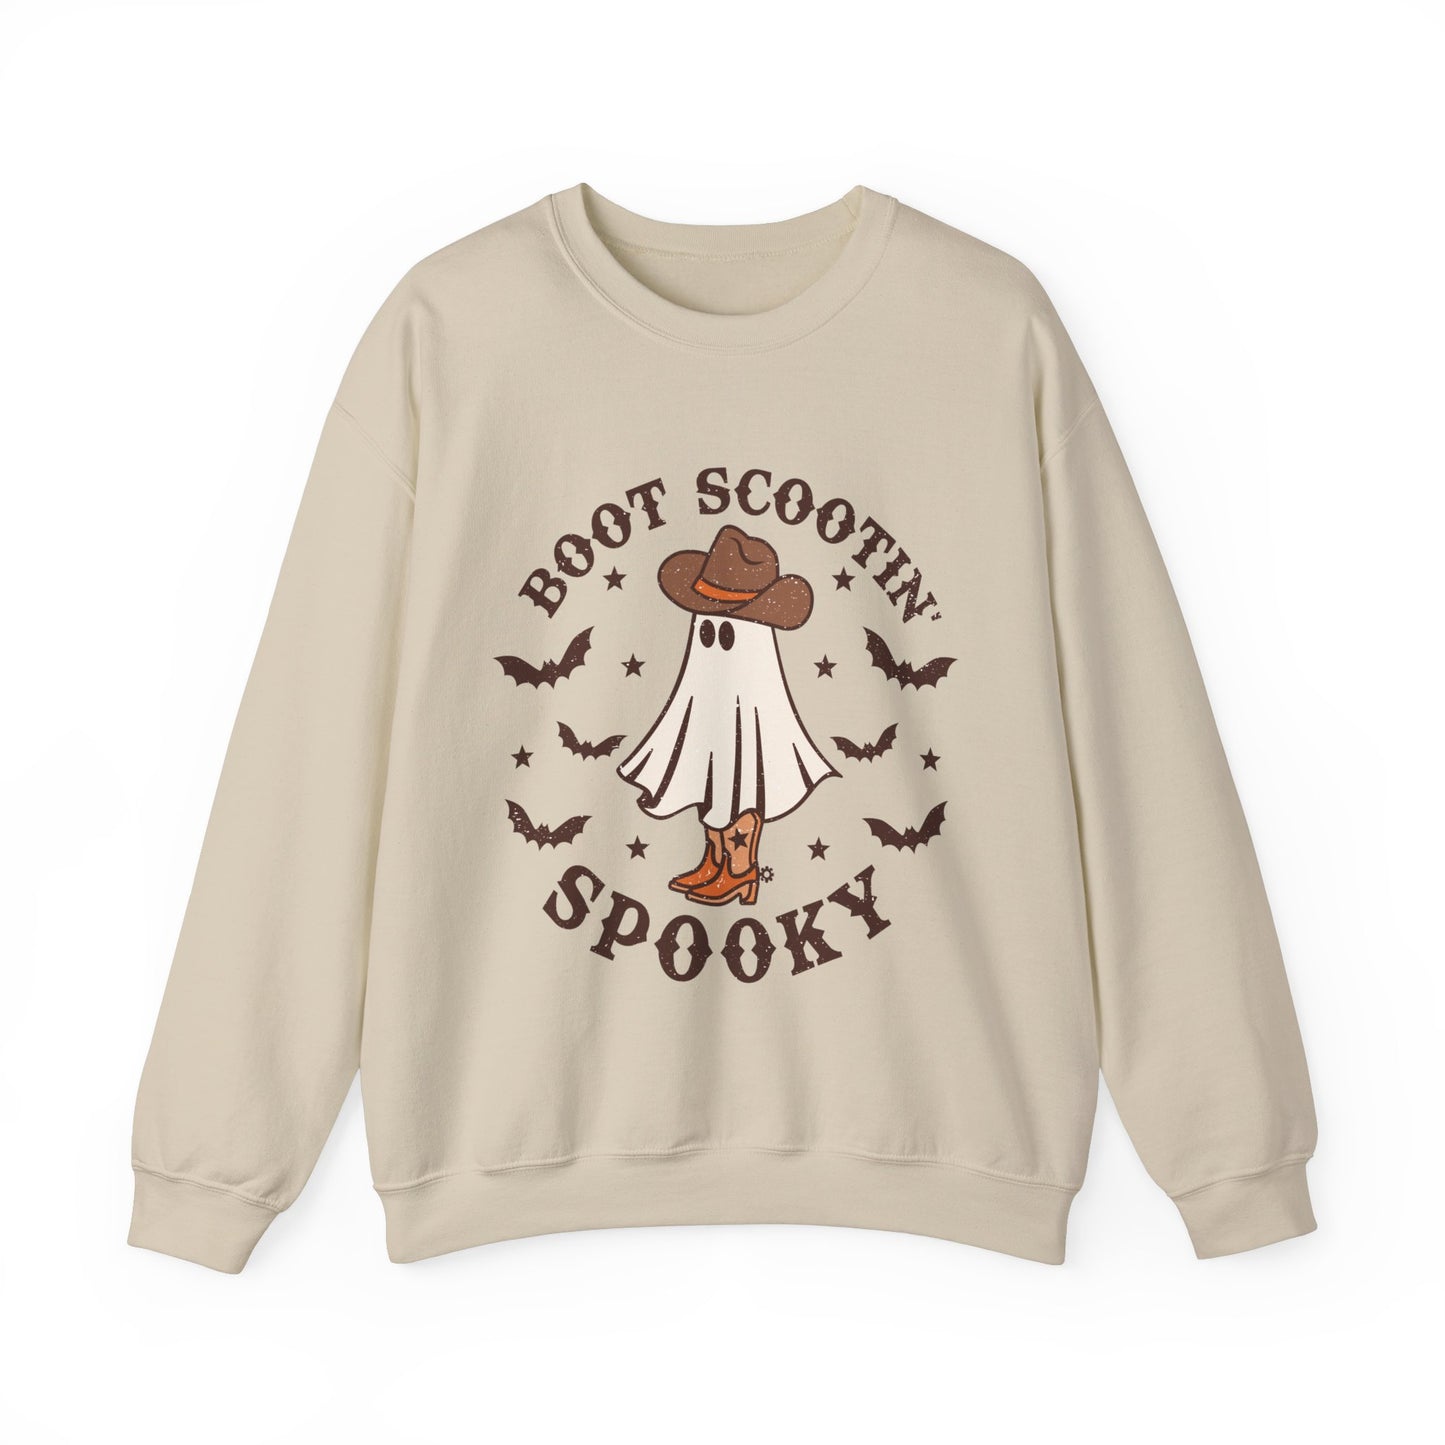 Cute Spooky Retro Halloween Sweatshirt, Scootin Boots Western shirt for Halloween, Vintage Western Cowboy Ghost Design, Holiday Gift for Her